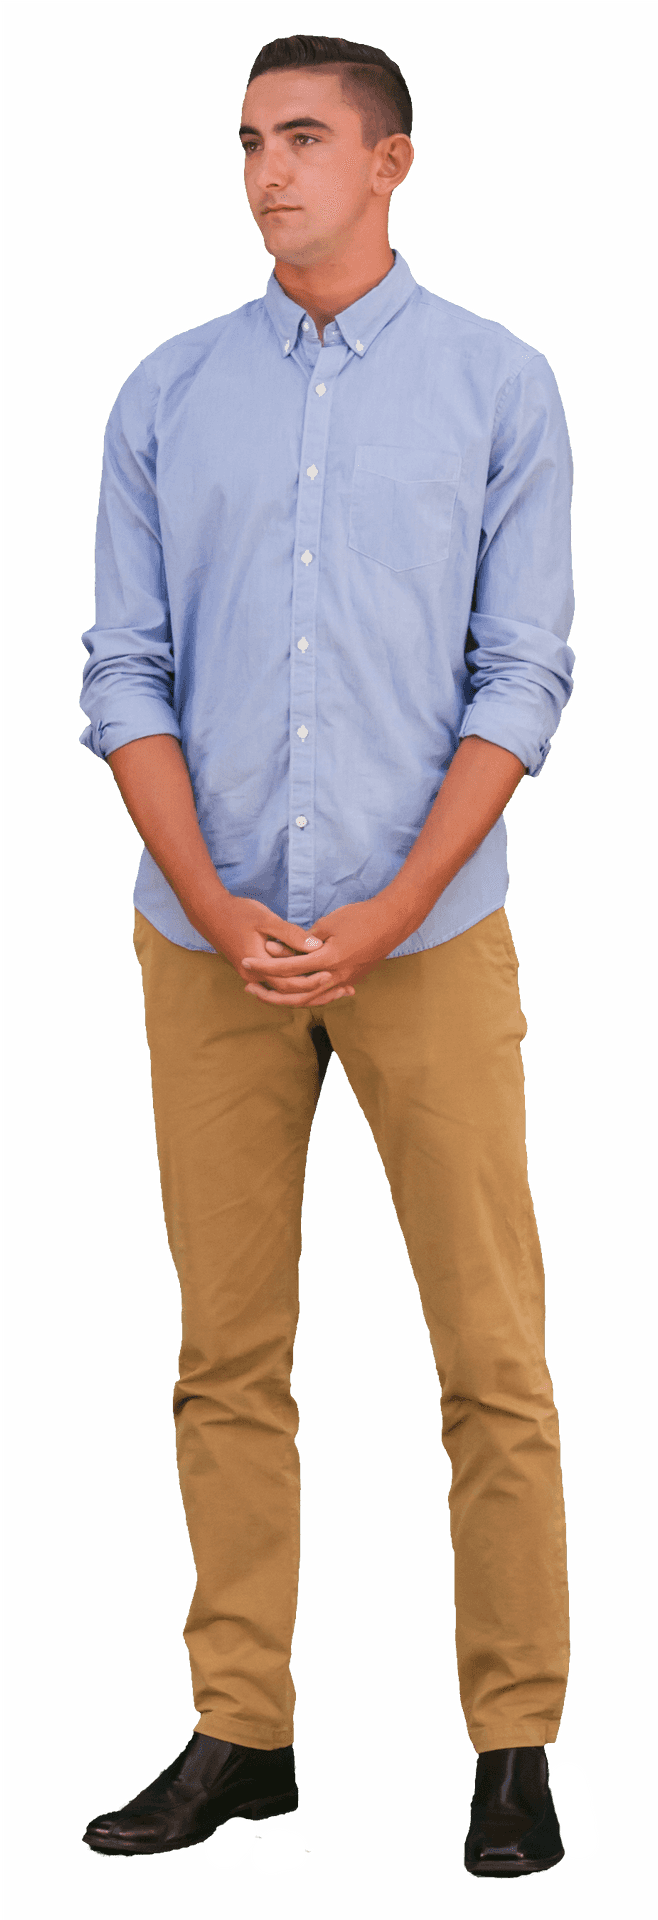 Casual Man Standing Green Screen Background PNG image